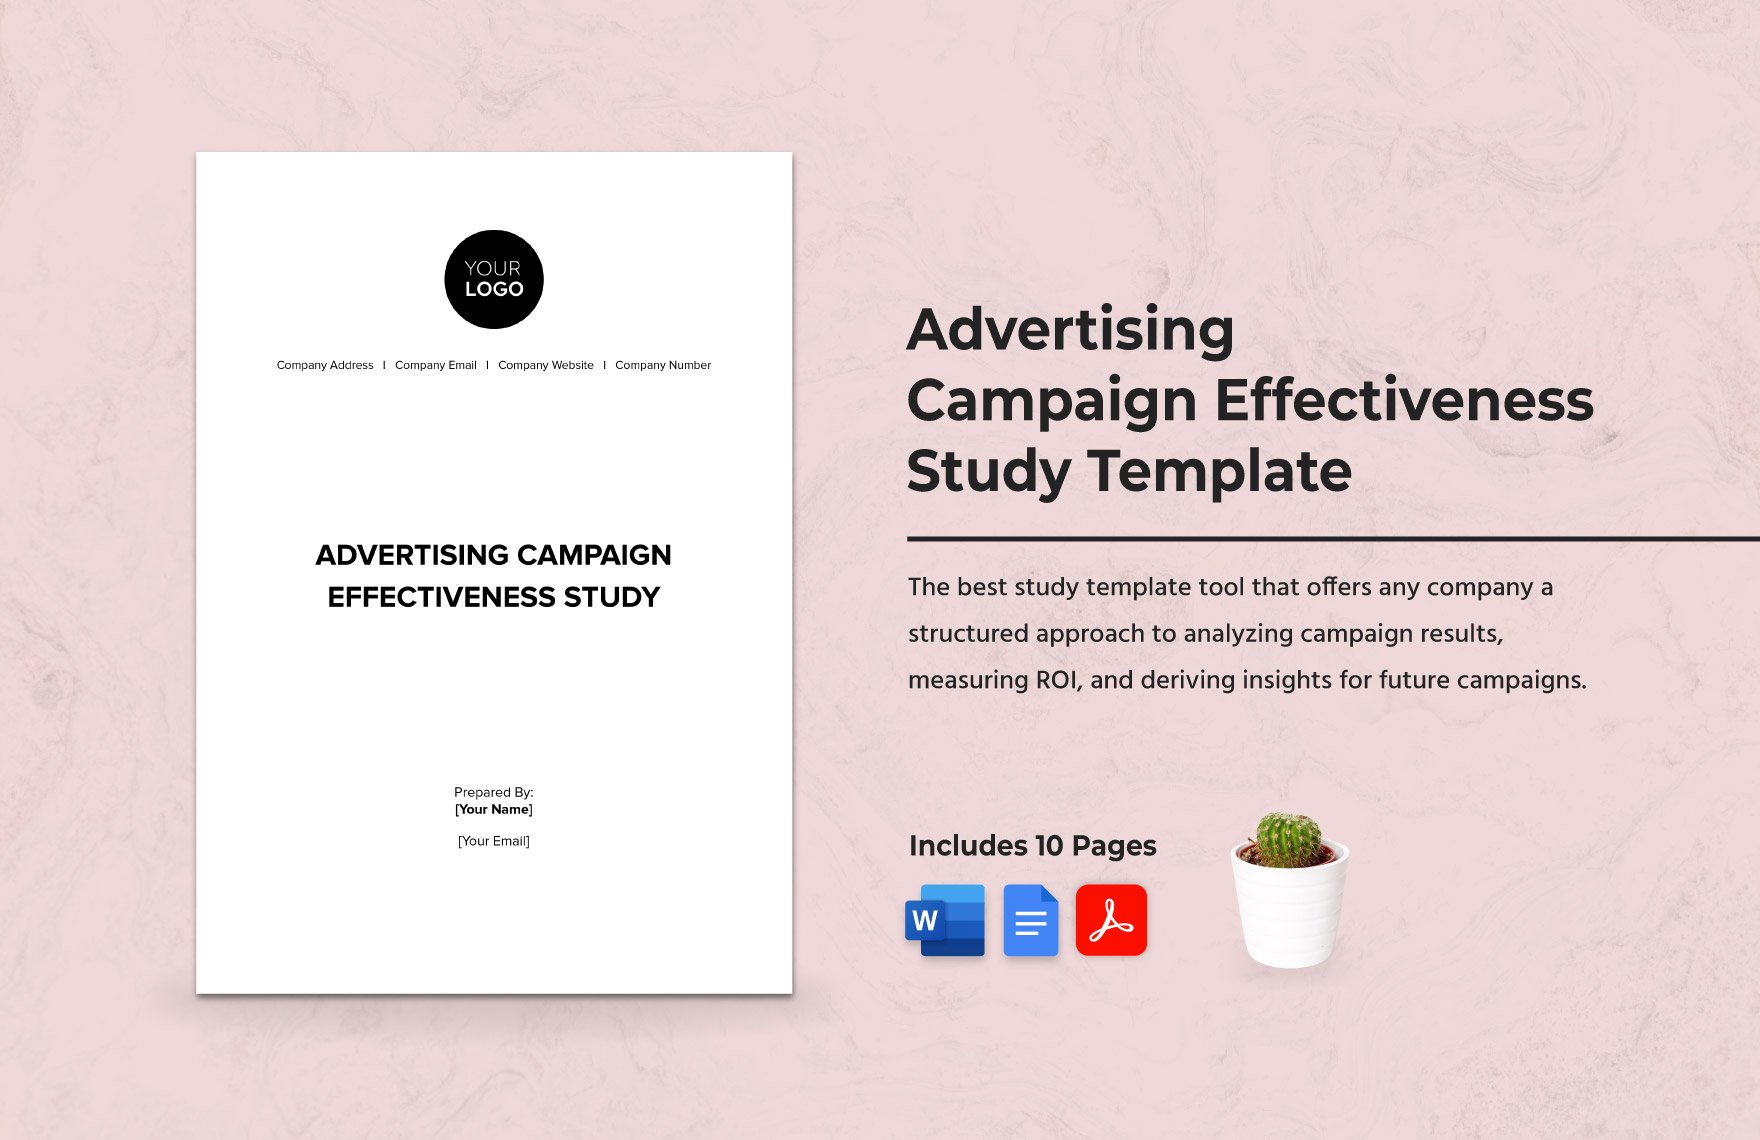 Advertising Campaign Effectiveness Study Template